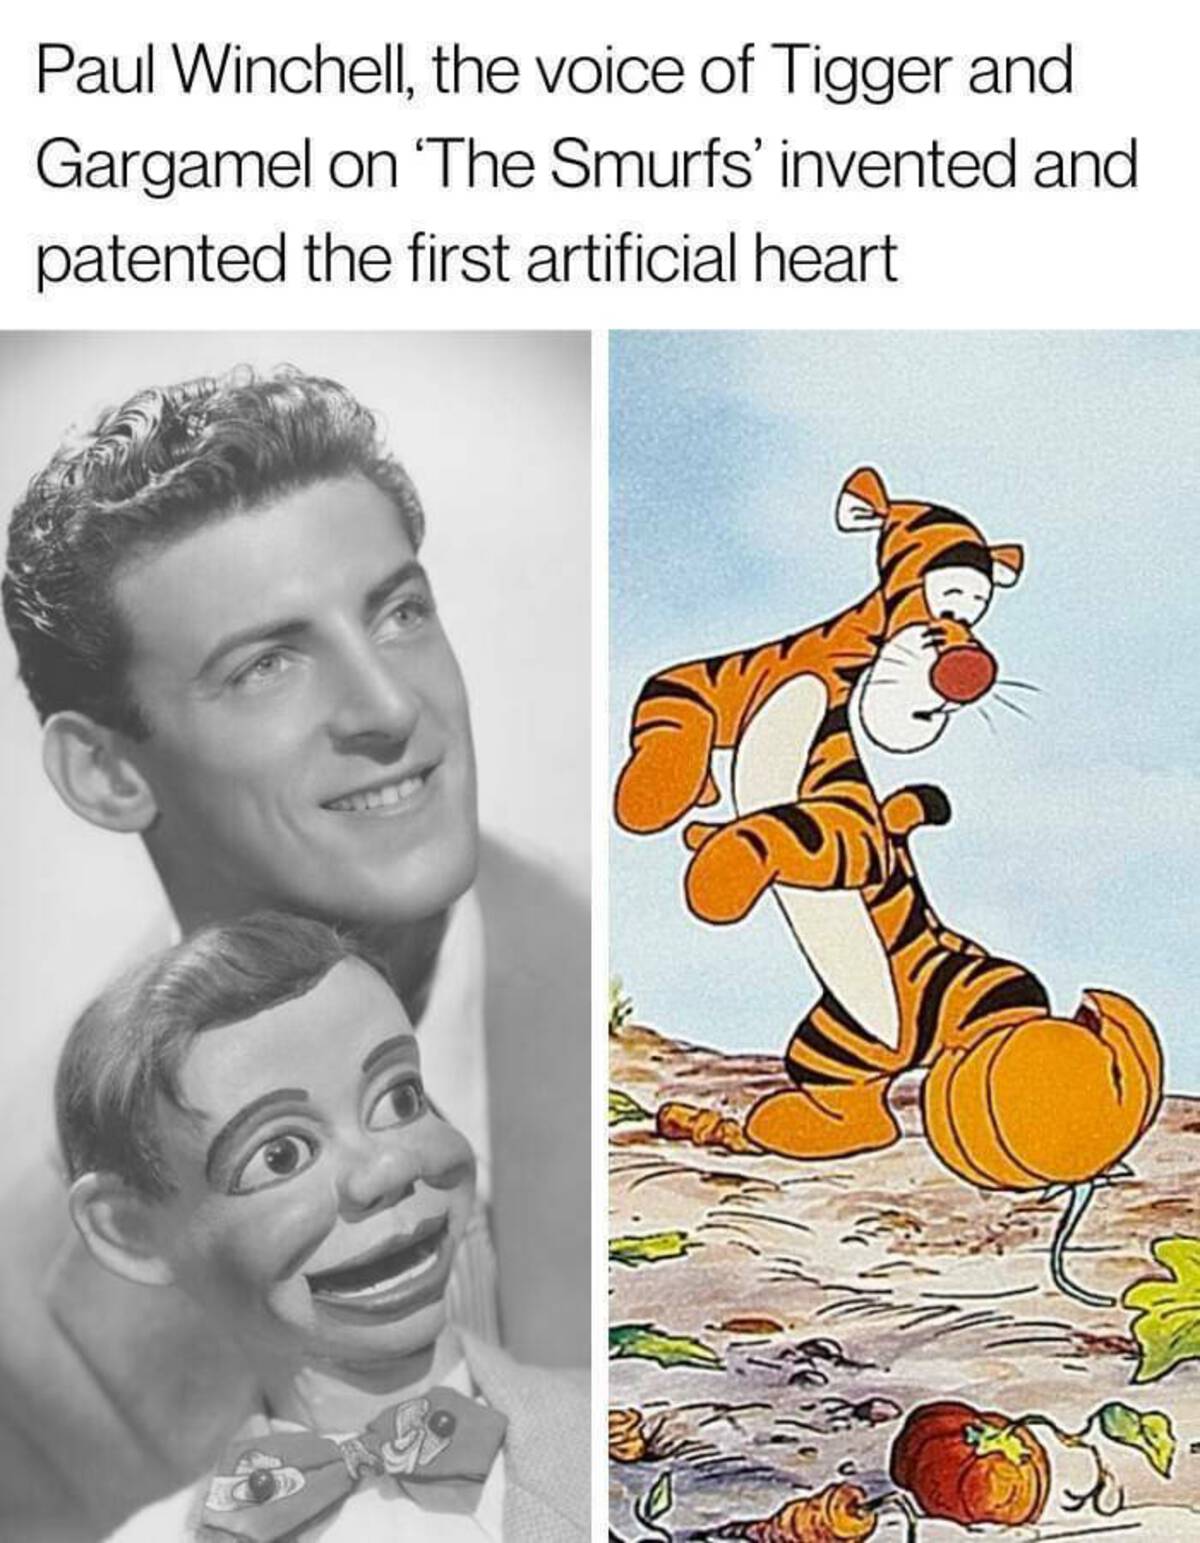 winnie the pooh and tigger too 1974 - Paul Winchell, the voice of Tigger and Gargamel on 'The Smurfs' invented and patented the first artificial heart